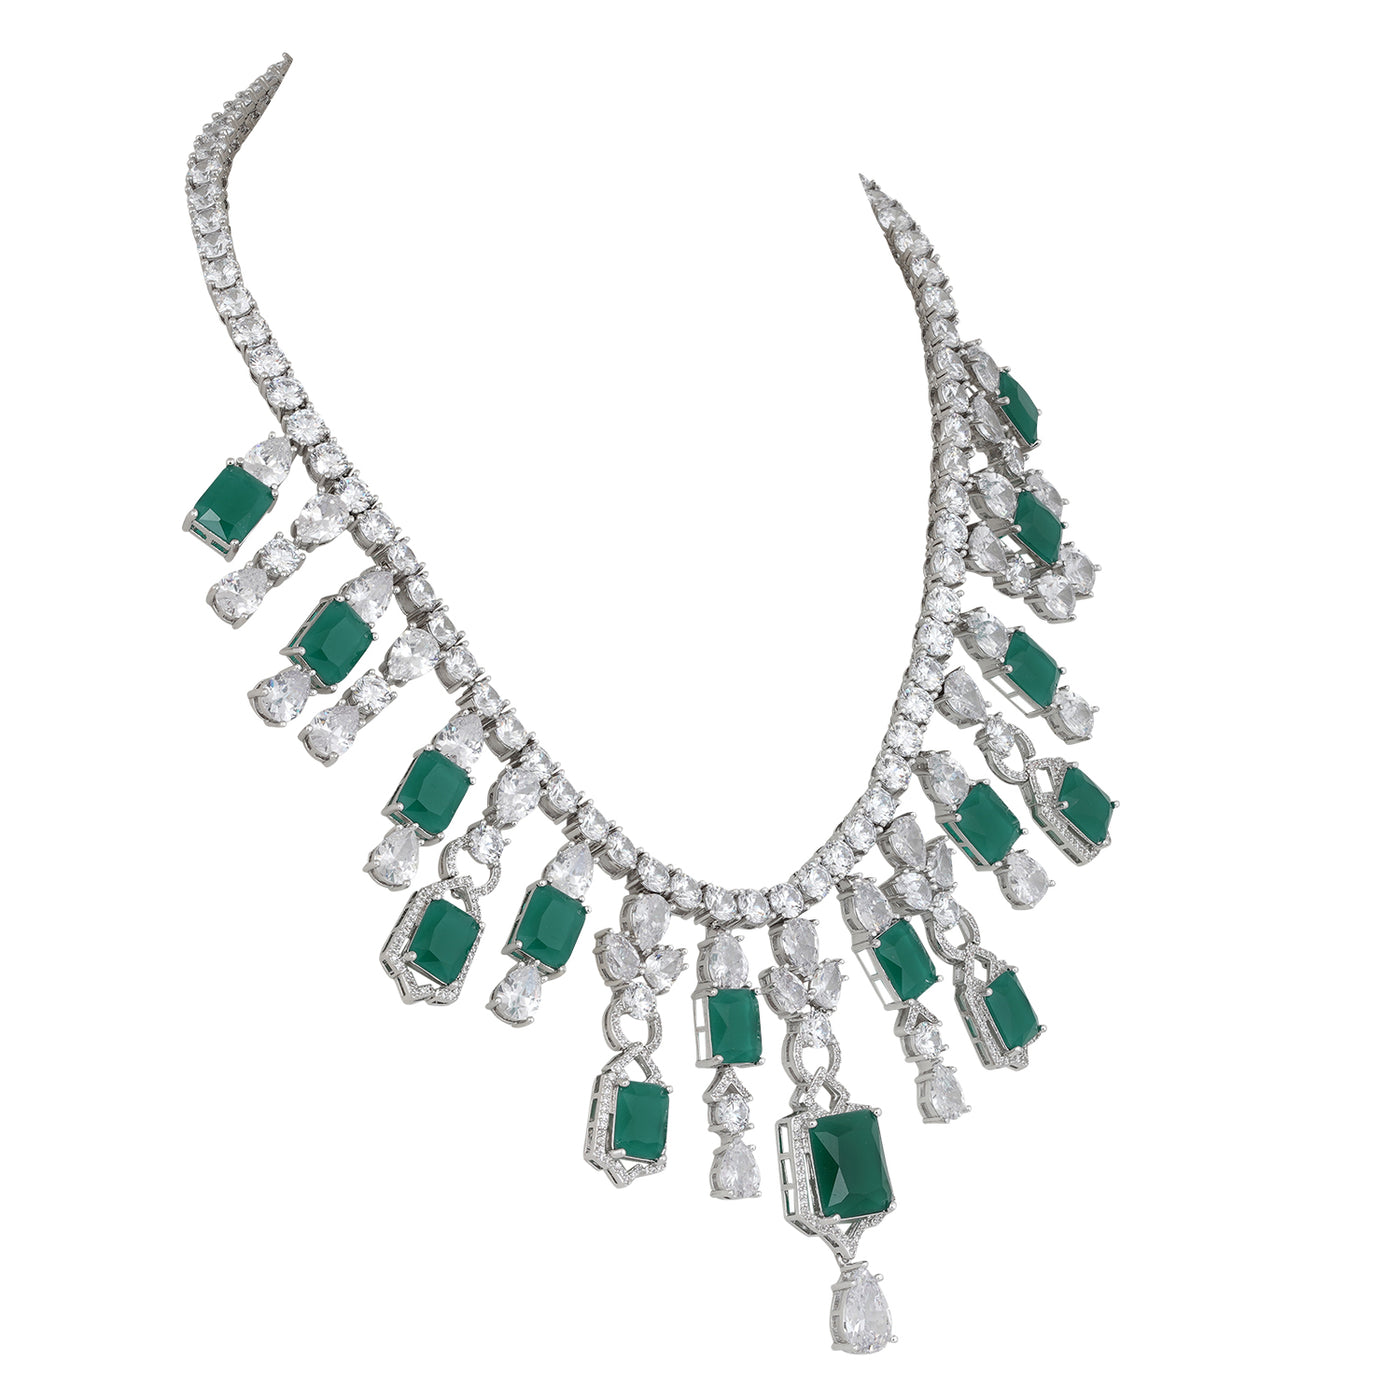 American Diamond and Green Stone Necklace Set